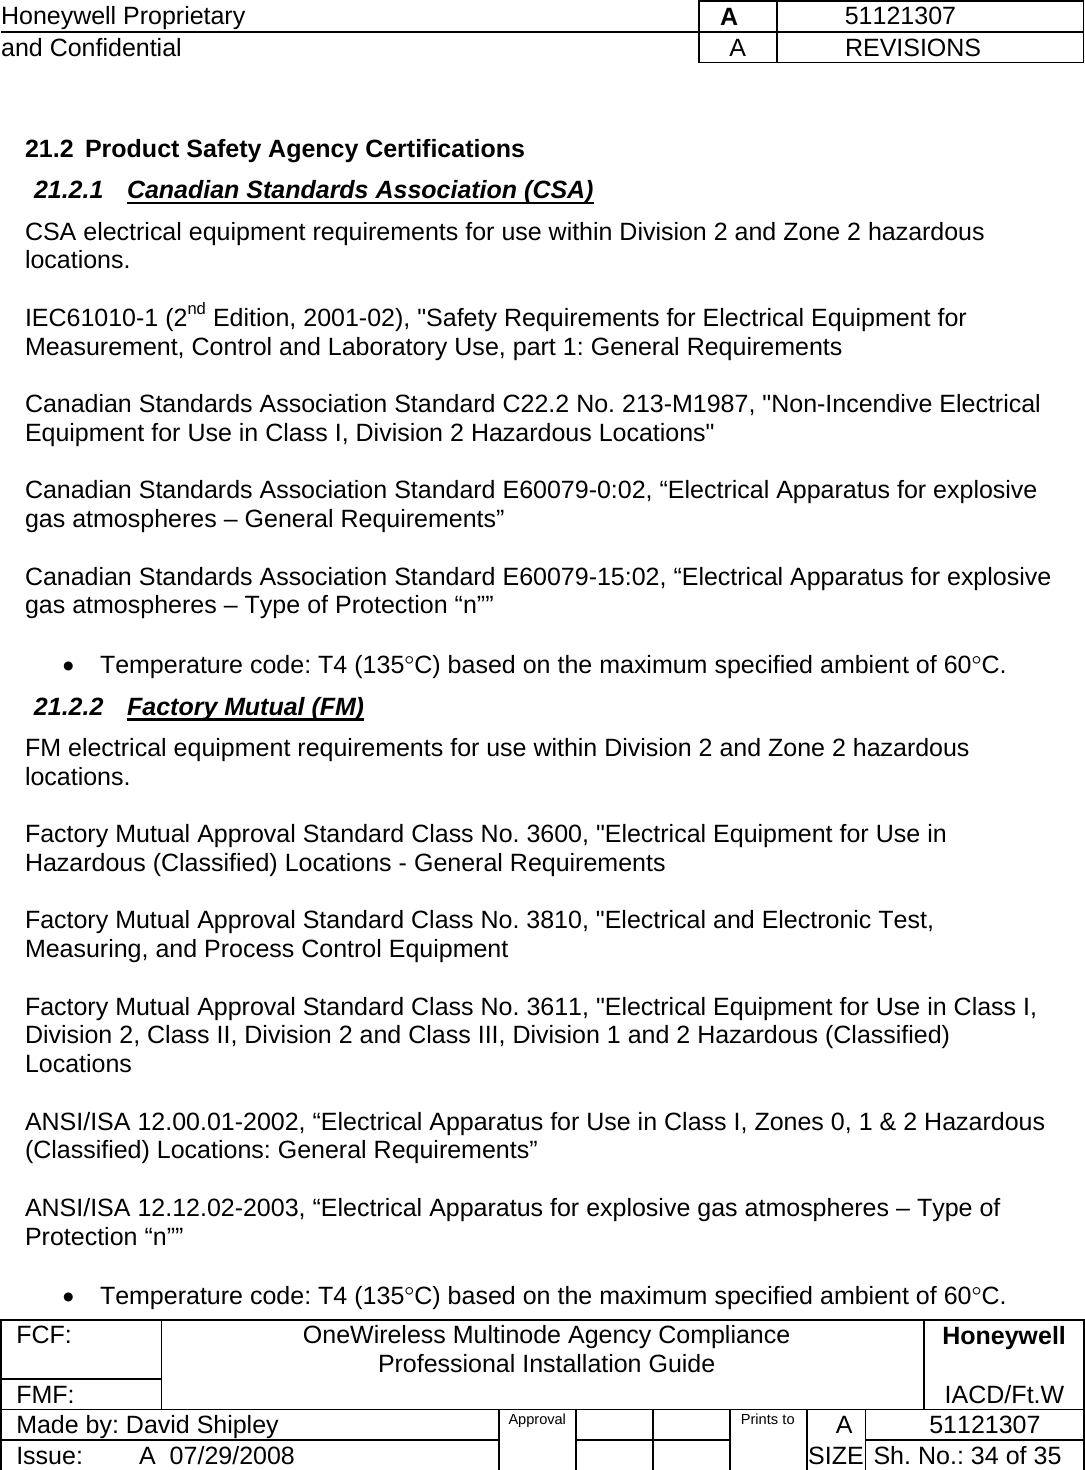 Honeywell Proprietary    A         51121307 and Confidential  A           REVISIONS  FCF:  OneWireless Multinode Agency Compliance Professional Installation Guide  Honeywell FMF:               IACD/Ft.W Made by: David Shipley  Approval   Prints to     A           51121307 Issue:        A  07/29/2008          SIZE  Sh. No.: 34 of 35   21.2  Product Safety Agency Certifications 21.2.1  Canadian Standards Association (CSA) CSA electrical equipment requirements for use within Division 2 and Zone 2 hazardous locations.  IEC61010-1 (2nd Edition, 2001-02), &quot;Safety Requirements for Electrical Equipment for Measurement, Control and Laboratory Use, part 1: General Requirements  Canadian Standards Association Standard C22.2 No. 213-M1987, &quot;Non-Incendive Electrical Equipment for Use in Class I, Division 2 Hazardous Locations&quot;  Canadian Standards Association Standard E60079-0:02, “Electrical Apparatus for explosive gas atmospheres – General Requirements”  Canadian Standards Association Standard E60079-15:02, “Electrical Apparatus for explosive gas atmospheres – Type of Protection “n””  •  Temperature code: T4 (135°C) based on the maximum specified ambient of 60°C. 21.2.2  Factory Mutual (FM) FM electrical equipment requirements for use within Division 2 and Zone 2 hazardous locations.  Factory Mutual Approval Standard Class No. 3600, &quot;Electrical Equipment for Use in Hazardous (Classified) Locations - General Requirements  Factory Mutual Approval Standard Class No. 3810, &quot;Electrical and Electronic Test, Measuring, and Process Control Equipment  Factory Mutual Approval Standard Class No. 3611, &quot;Electrical Equipment for Use in Class I, Division 2, Class II, Division 2 and Class III, Division 1 and 2 Hazardous (Classified) Locations   ANSI/ISA 12.00.01-2002, “Electrical Apparatus for Use in Class I, Zones 0, 1 &amp; 2 Hazardous (Classified) Locations: General Requirements”  ANSI/ISA 12.12.02-2003, “Electrical Apparatus for explosive gas atmospheres – Type of Protection “n””  •  Temperature code: T4 (135°C) based on the maximum specified ambient of 60°C. 